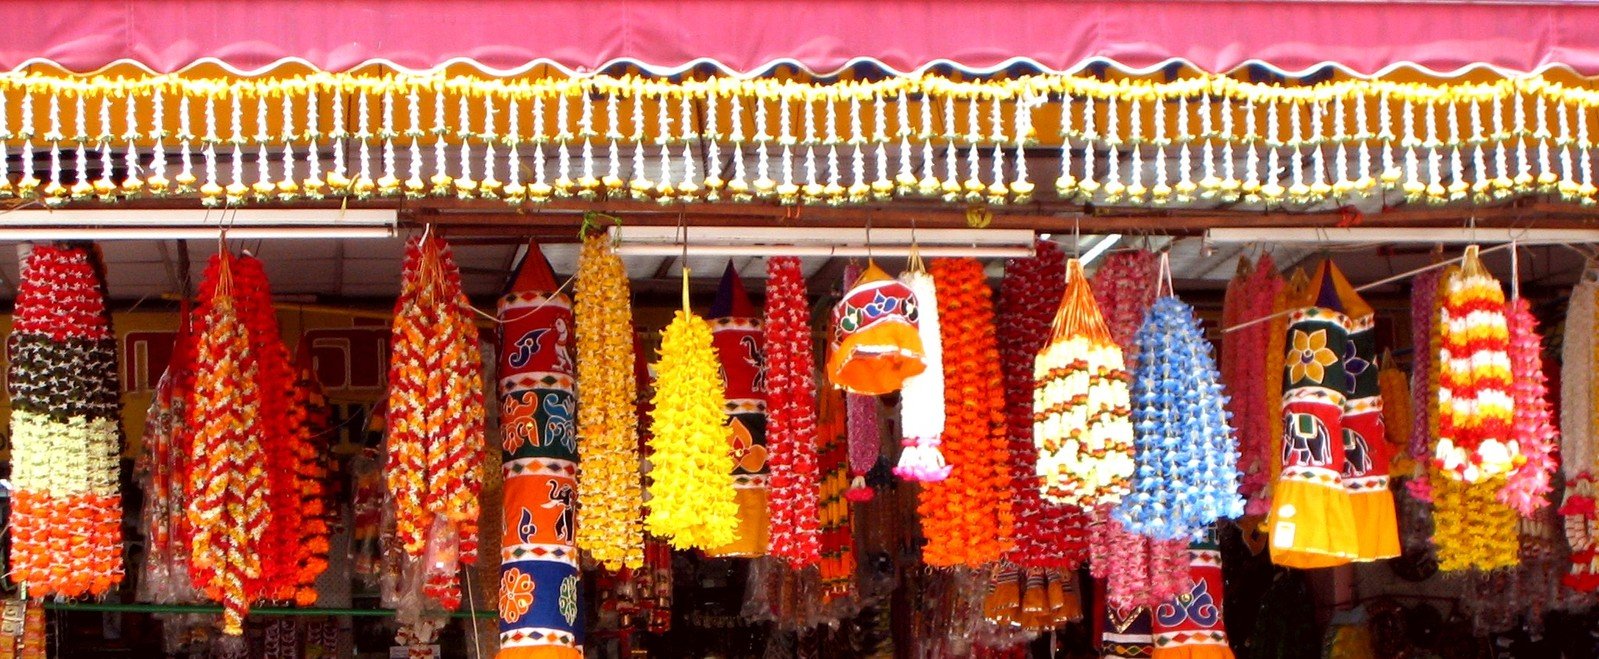 a street vendor displays brightly colored candy canes